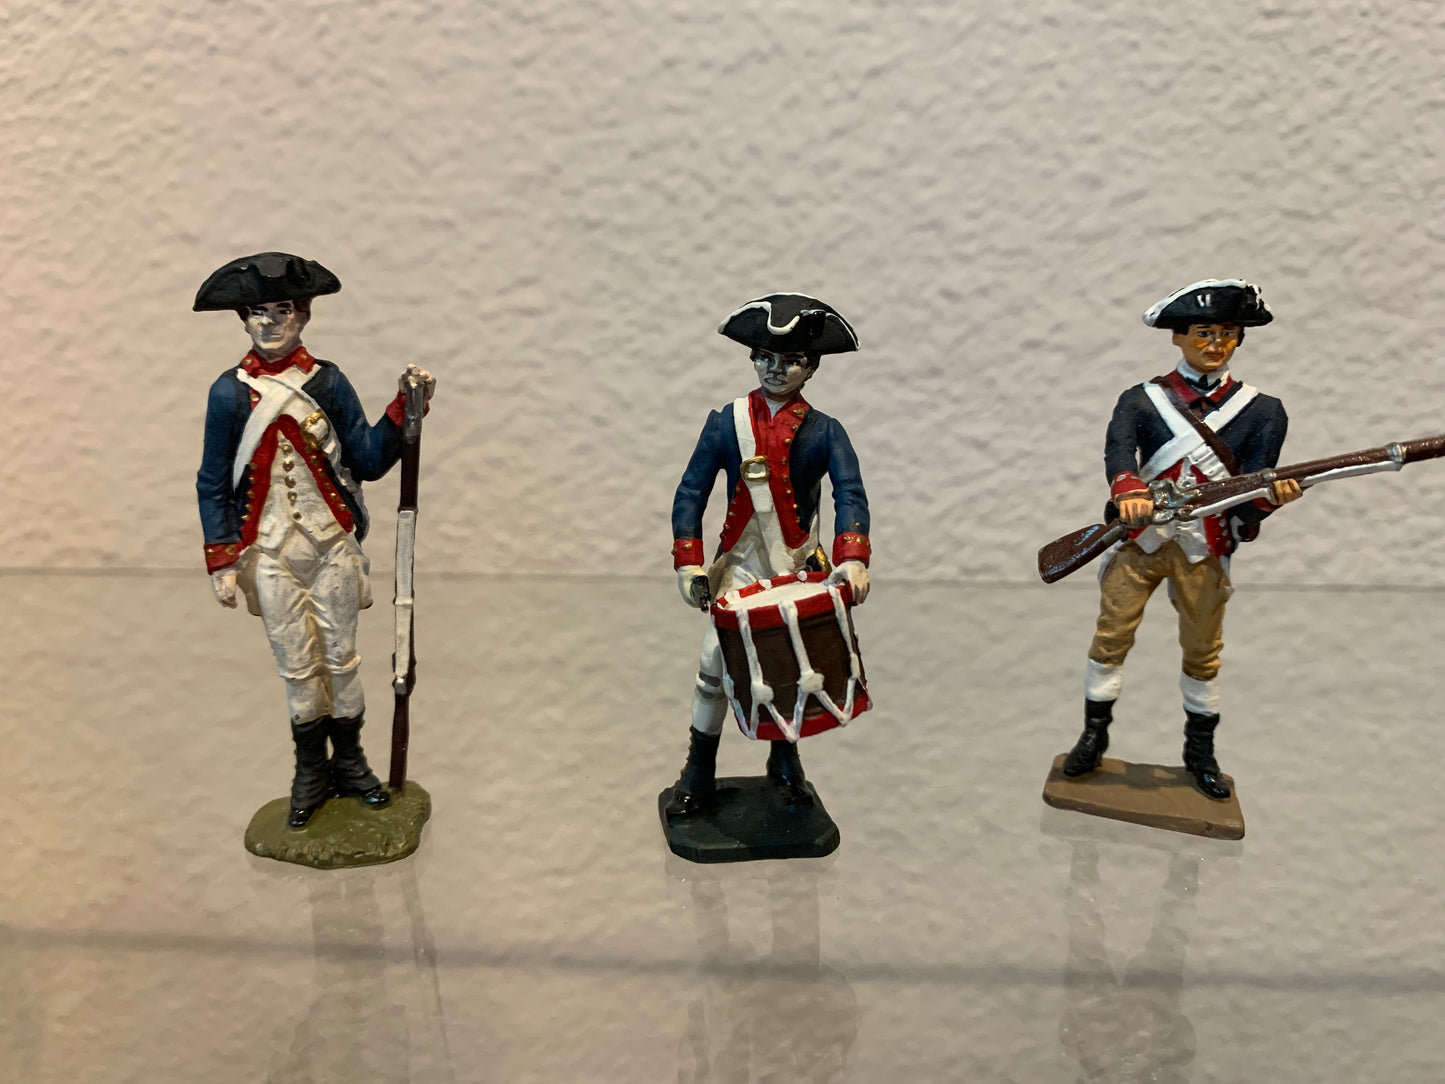 3 toy soldiers from American Revolution